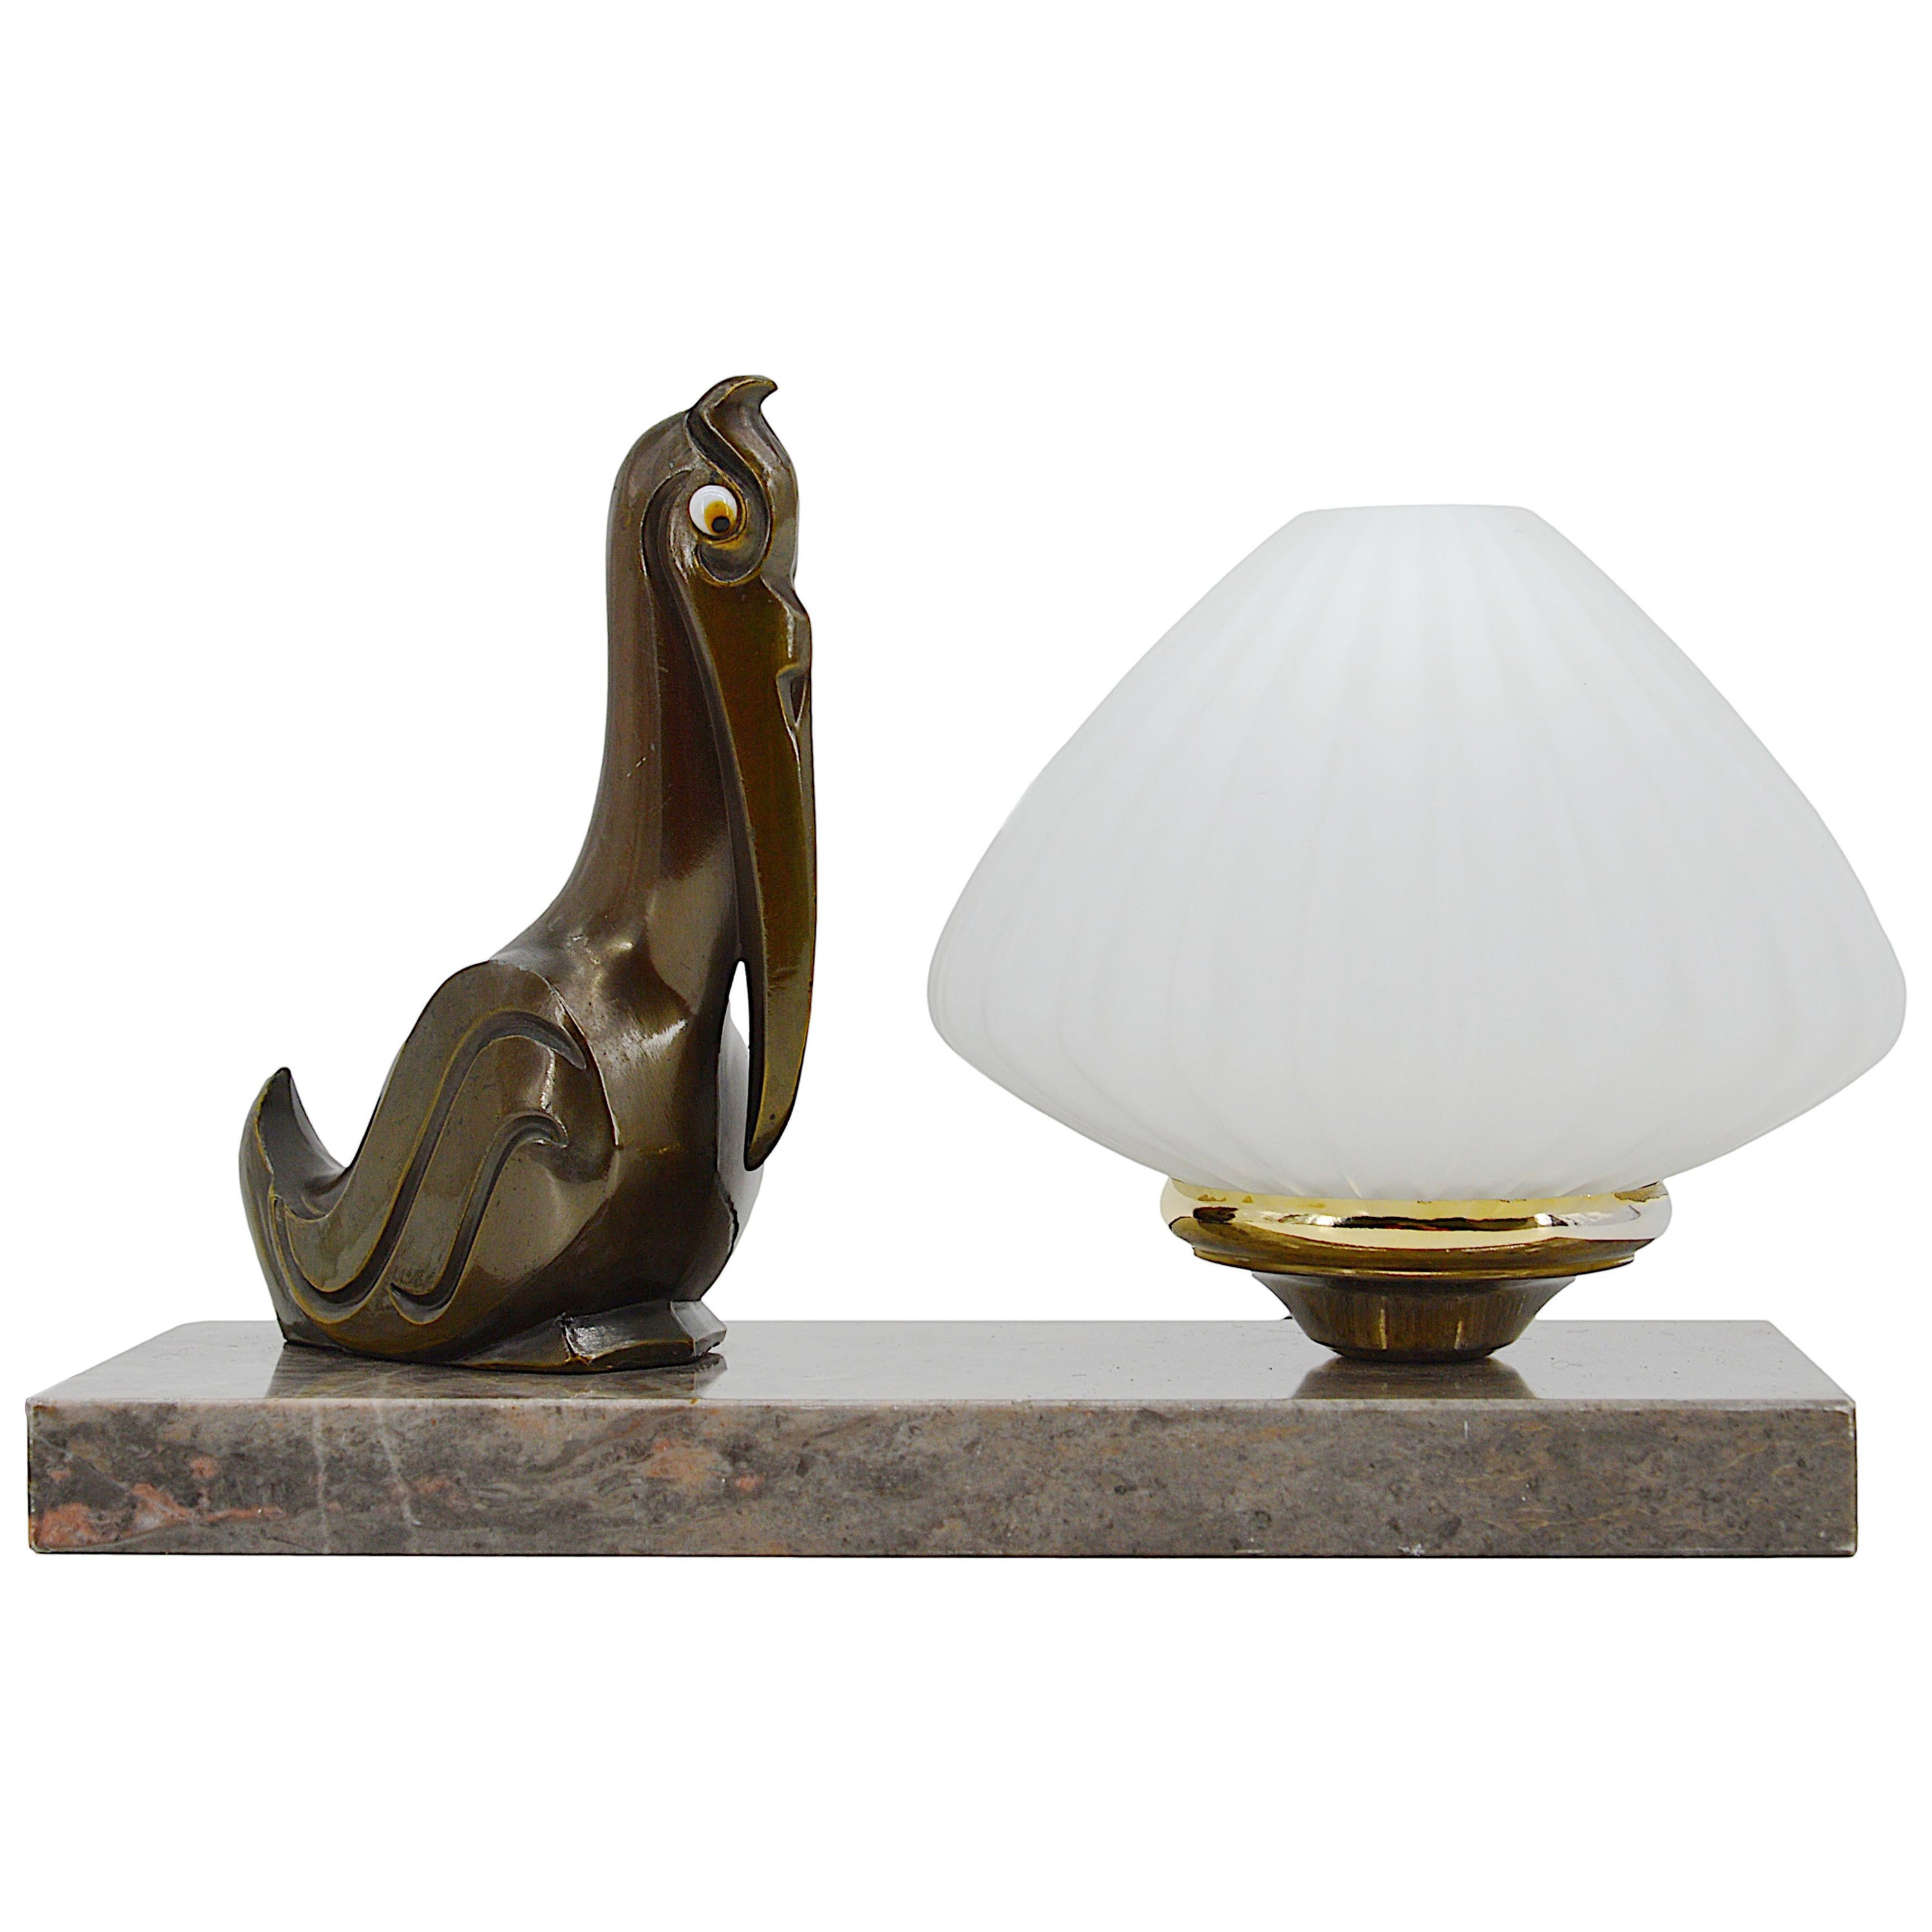 French Art Deco Pelican Table Lamp Night-Light, 1930s